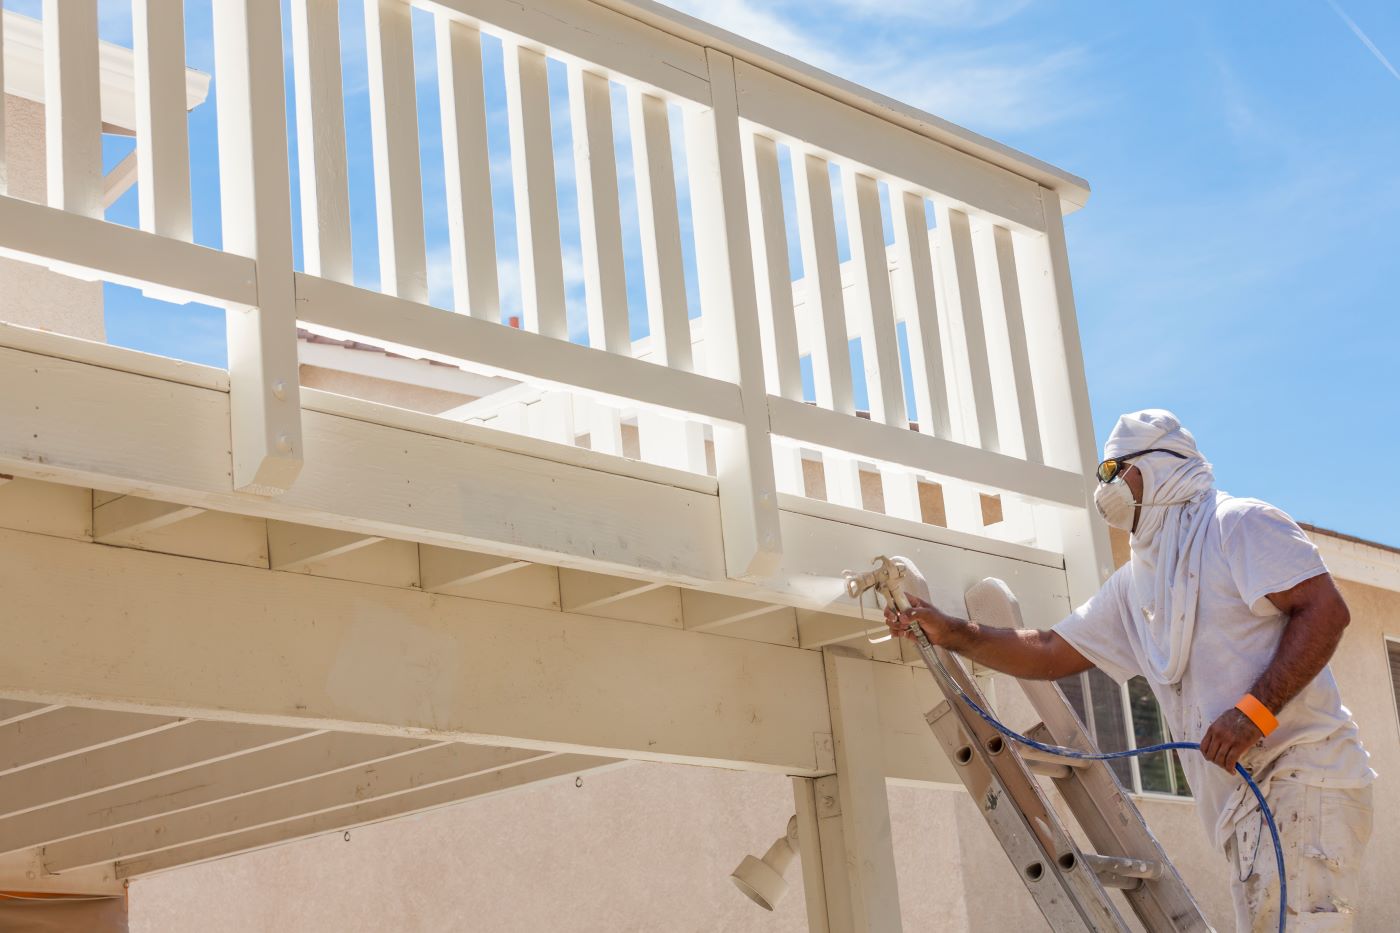 Get Work in Painting and Decorating Today 